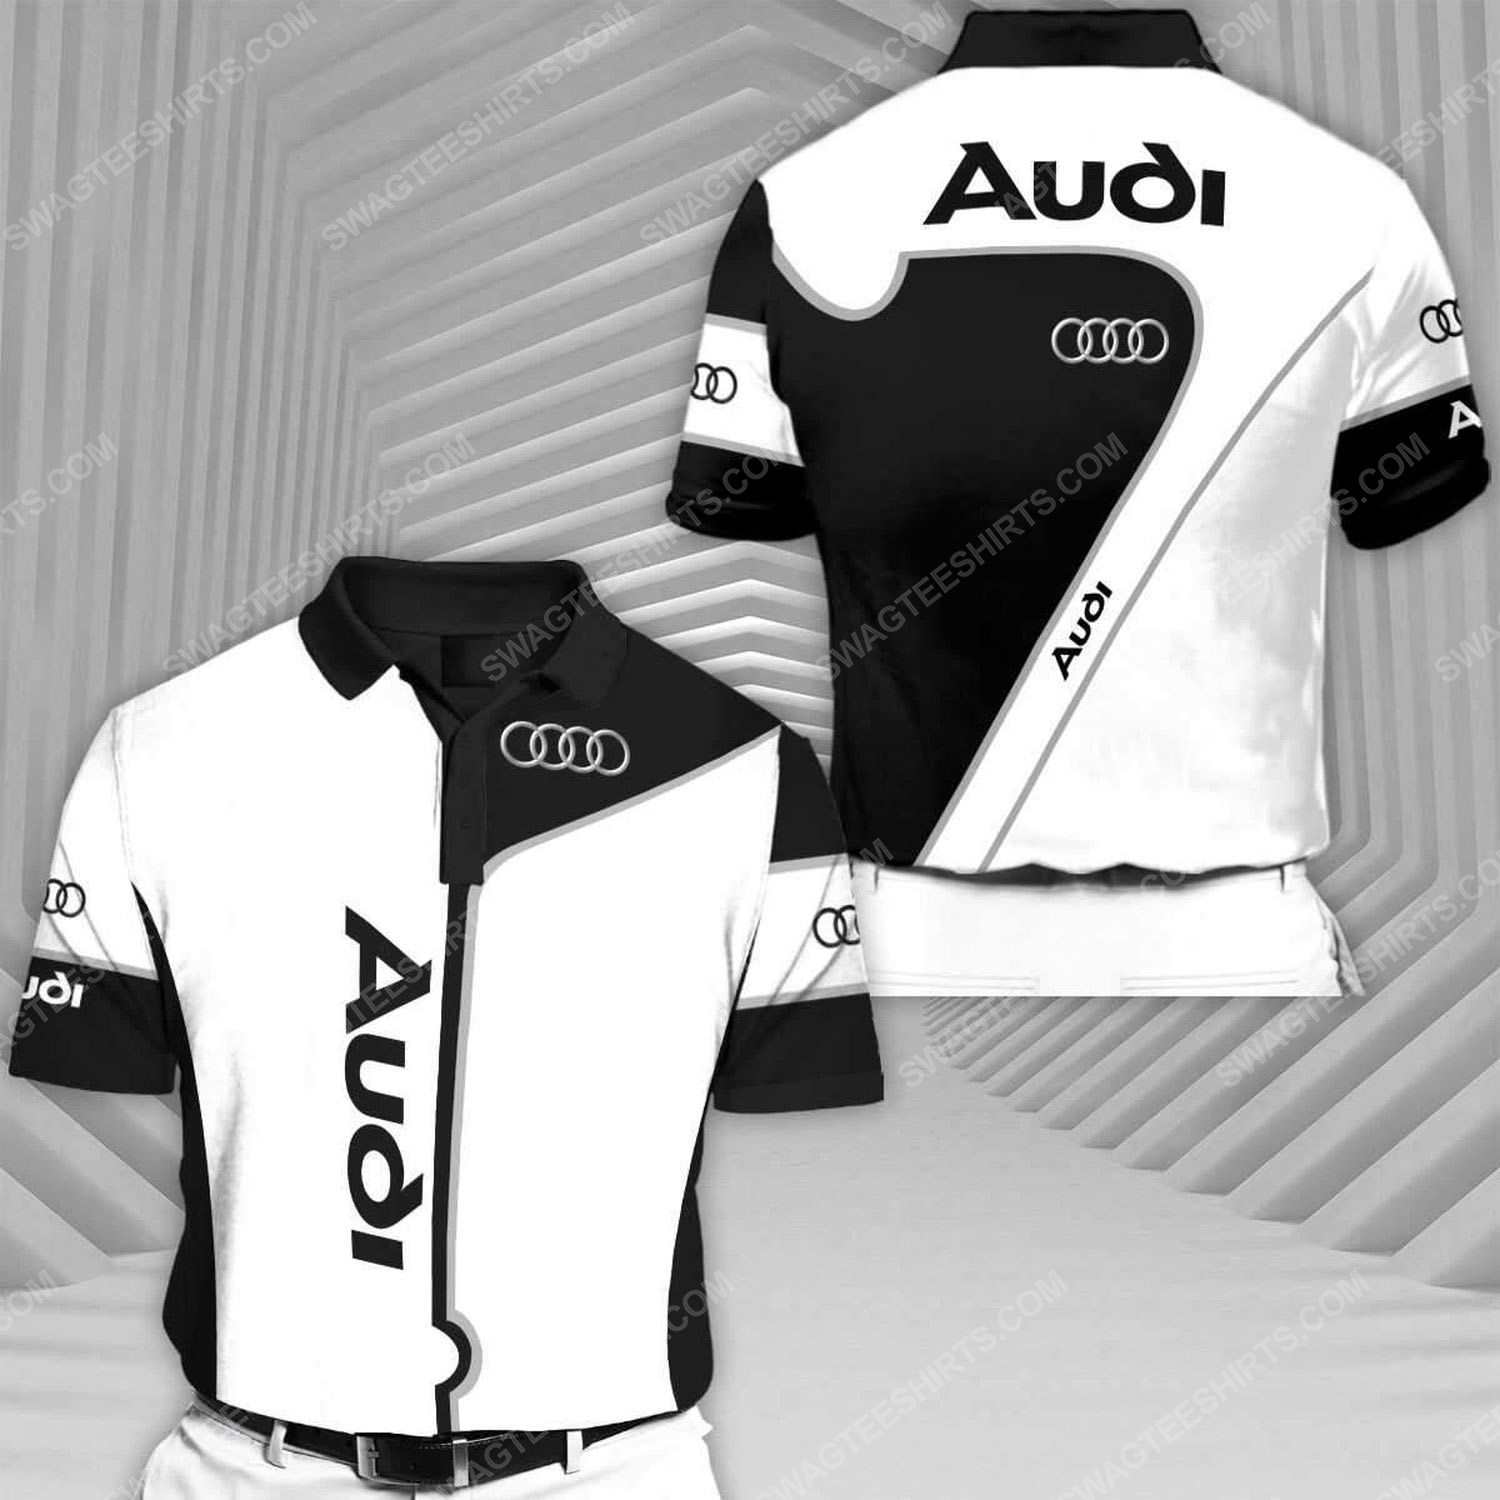 [special edition] Audi sports car racing all over print polo shirt – Maria